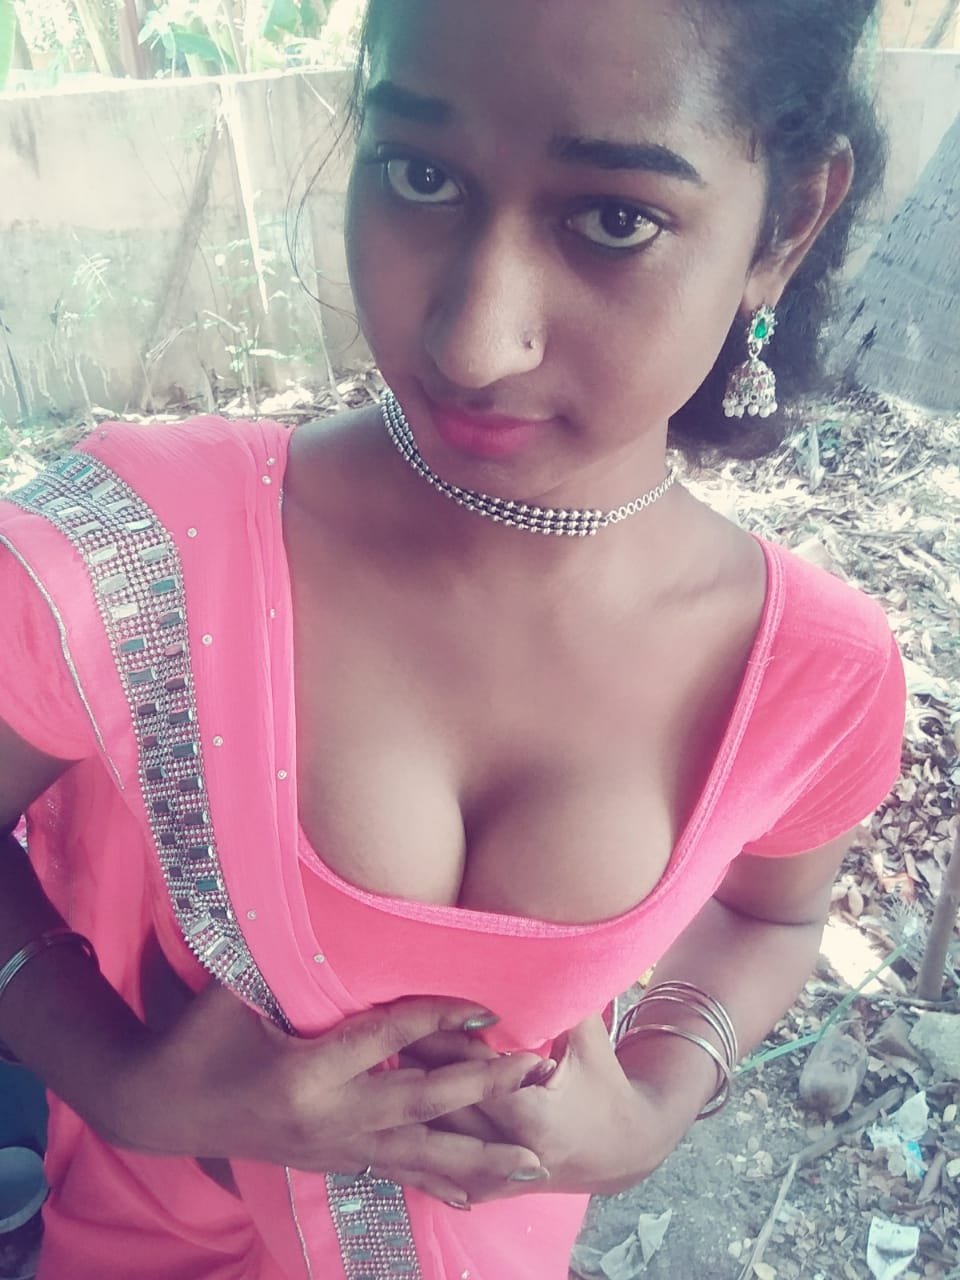 Indian Shemale In Canada - Black Shemale Escort India | Anal Dream House